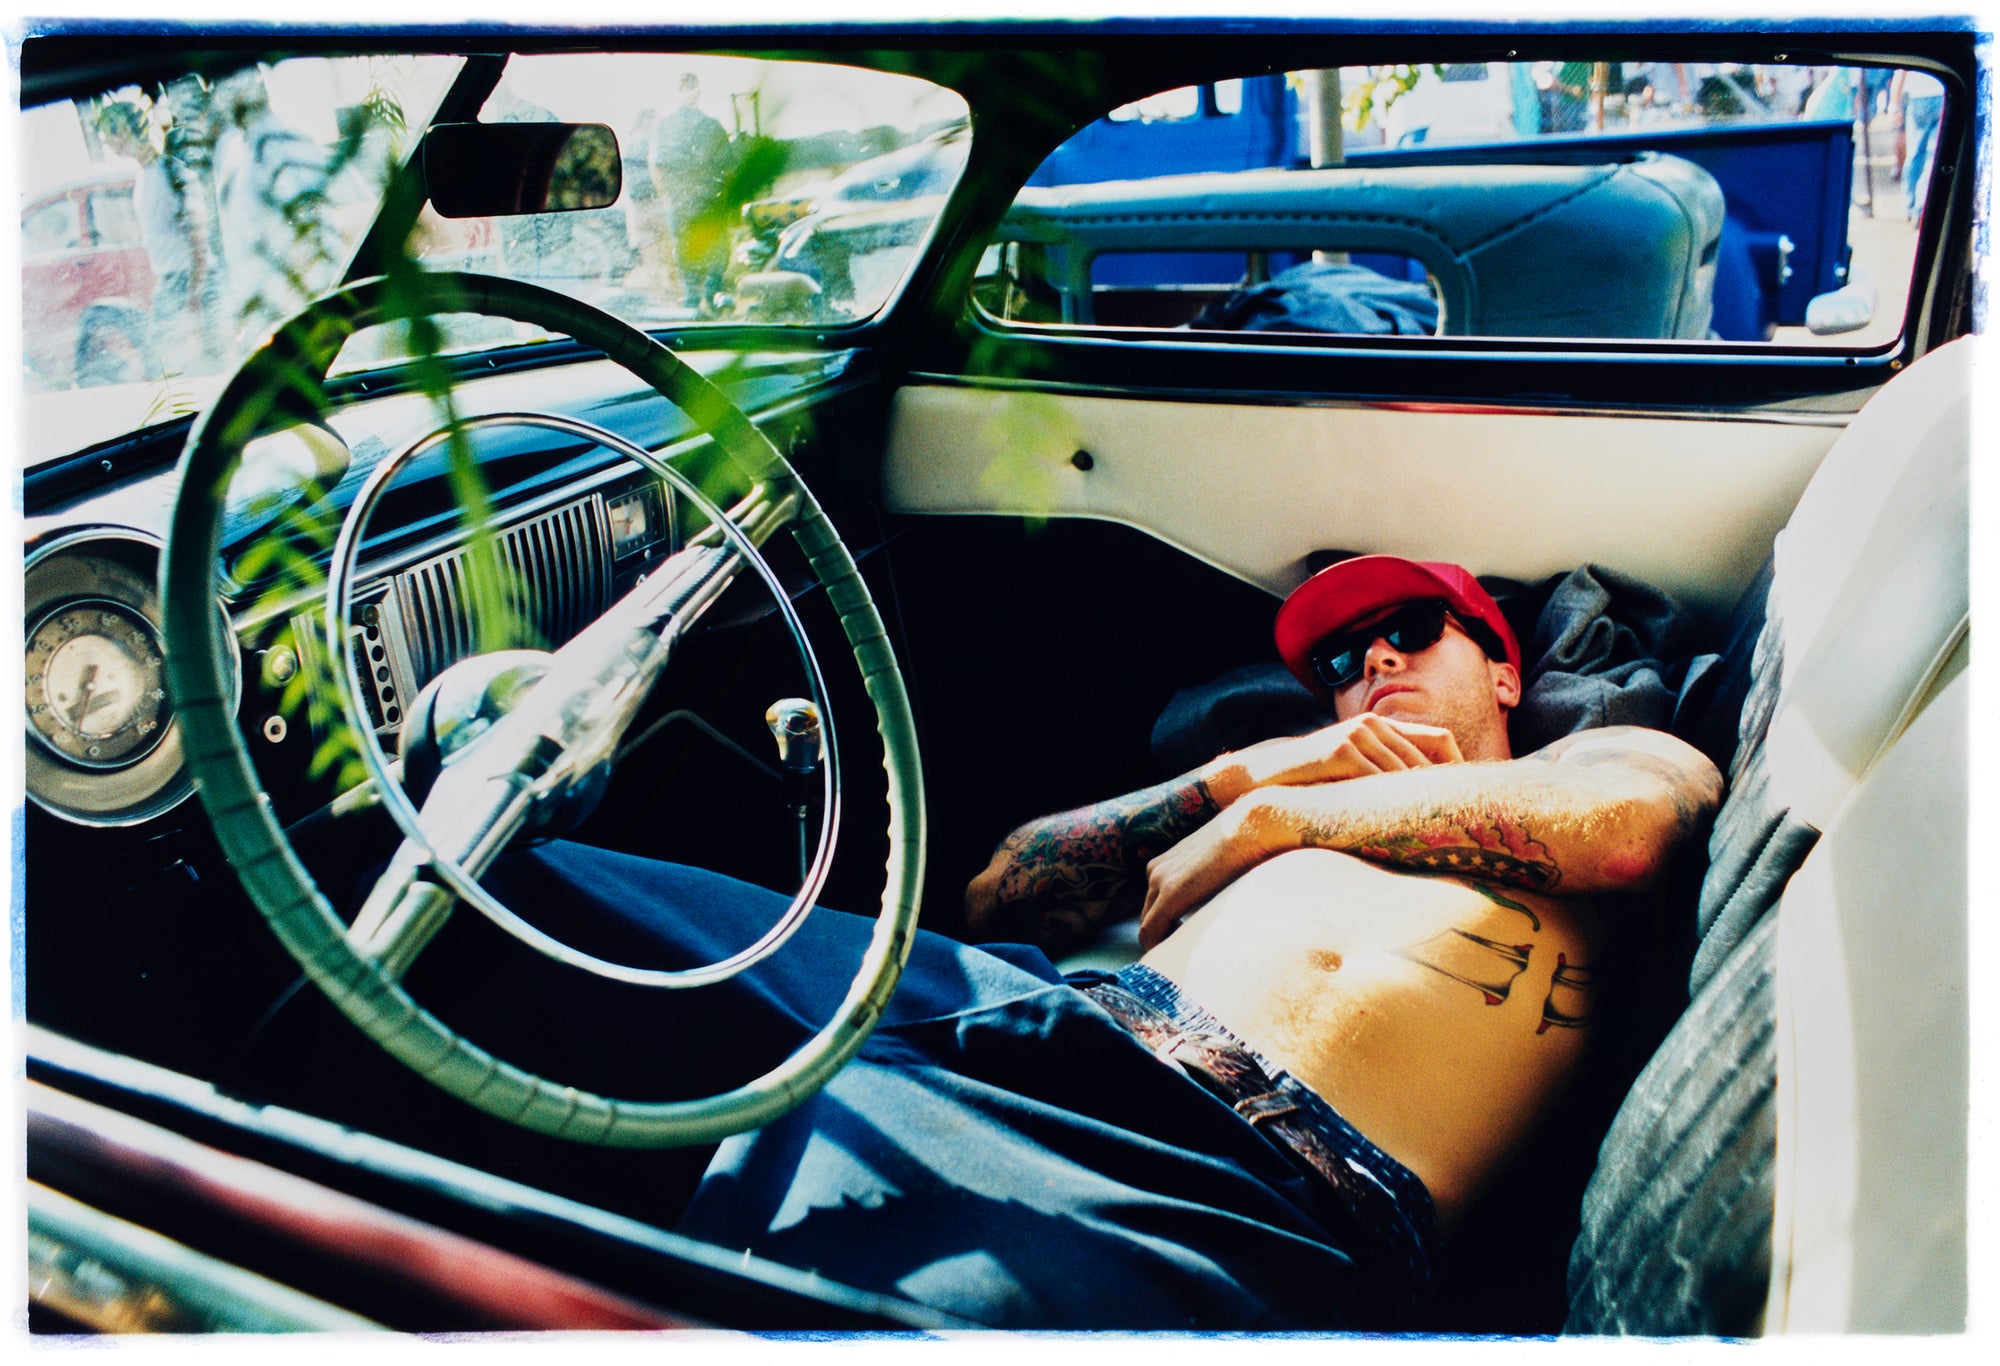 Photograph by Richard Heeps. Inside a classic American car and lying on the seats is a man resting.